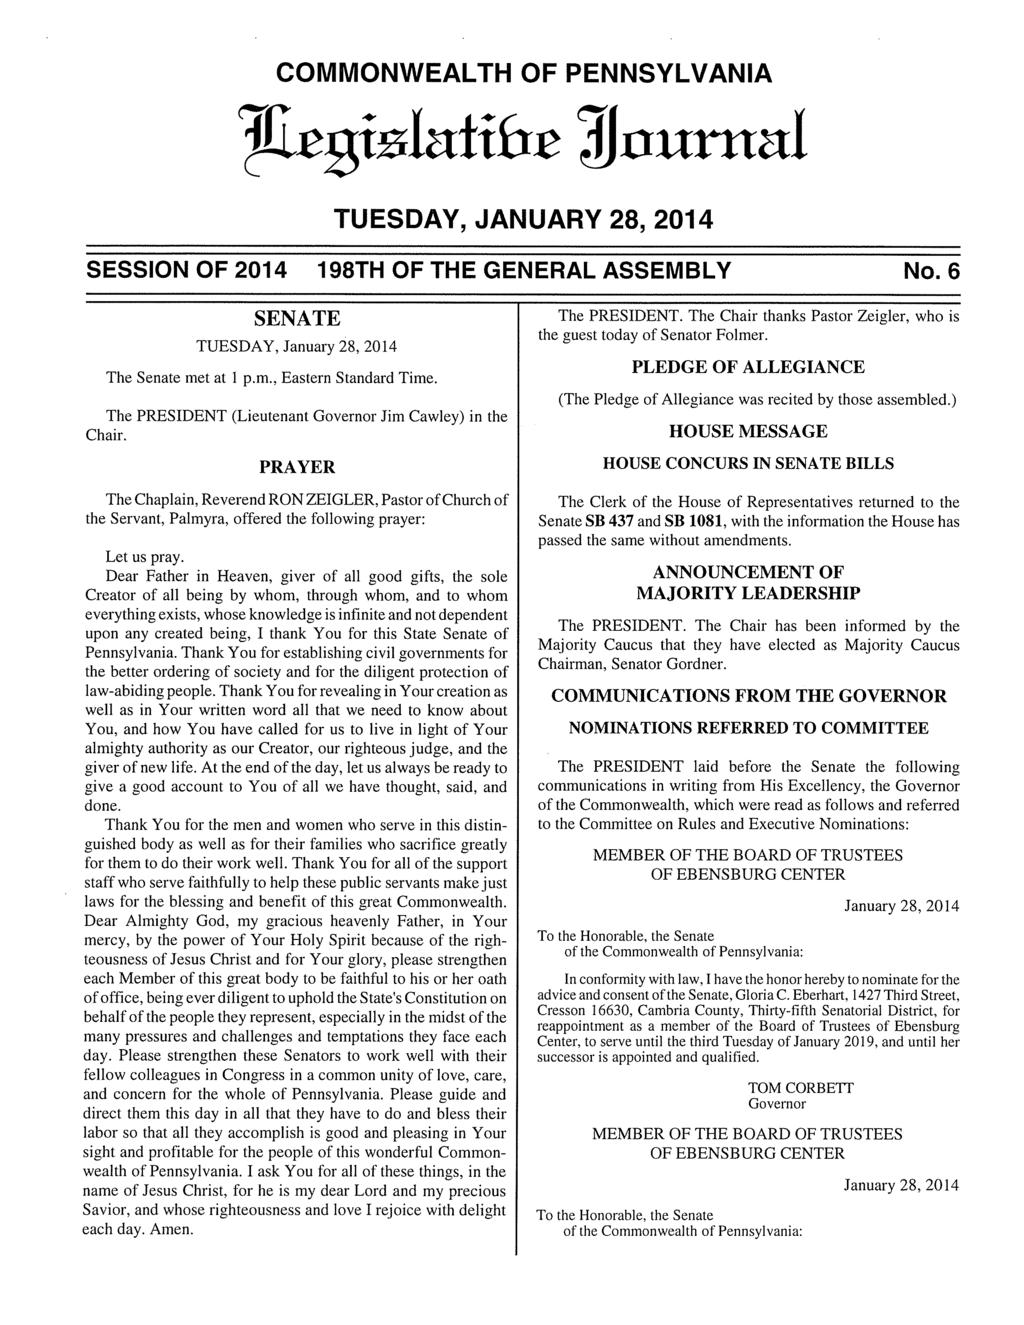 COMMONWEALTH OF PENNSYLVANIA 71,Ceisiafitve Tijountal TUESDAY, JANUARY 28, 2014 SESSION OF 2014 198TH OF THE GENERAL ASSEMBLY No. 6 SENATE TUESDAY, January 28, 2014 The Senate me